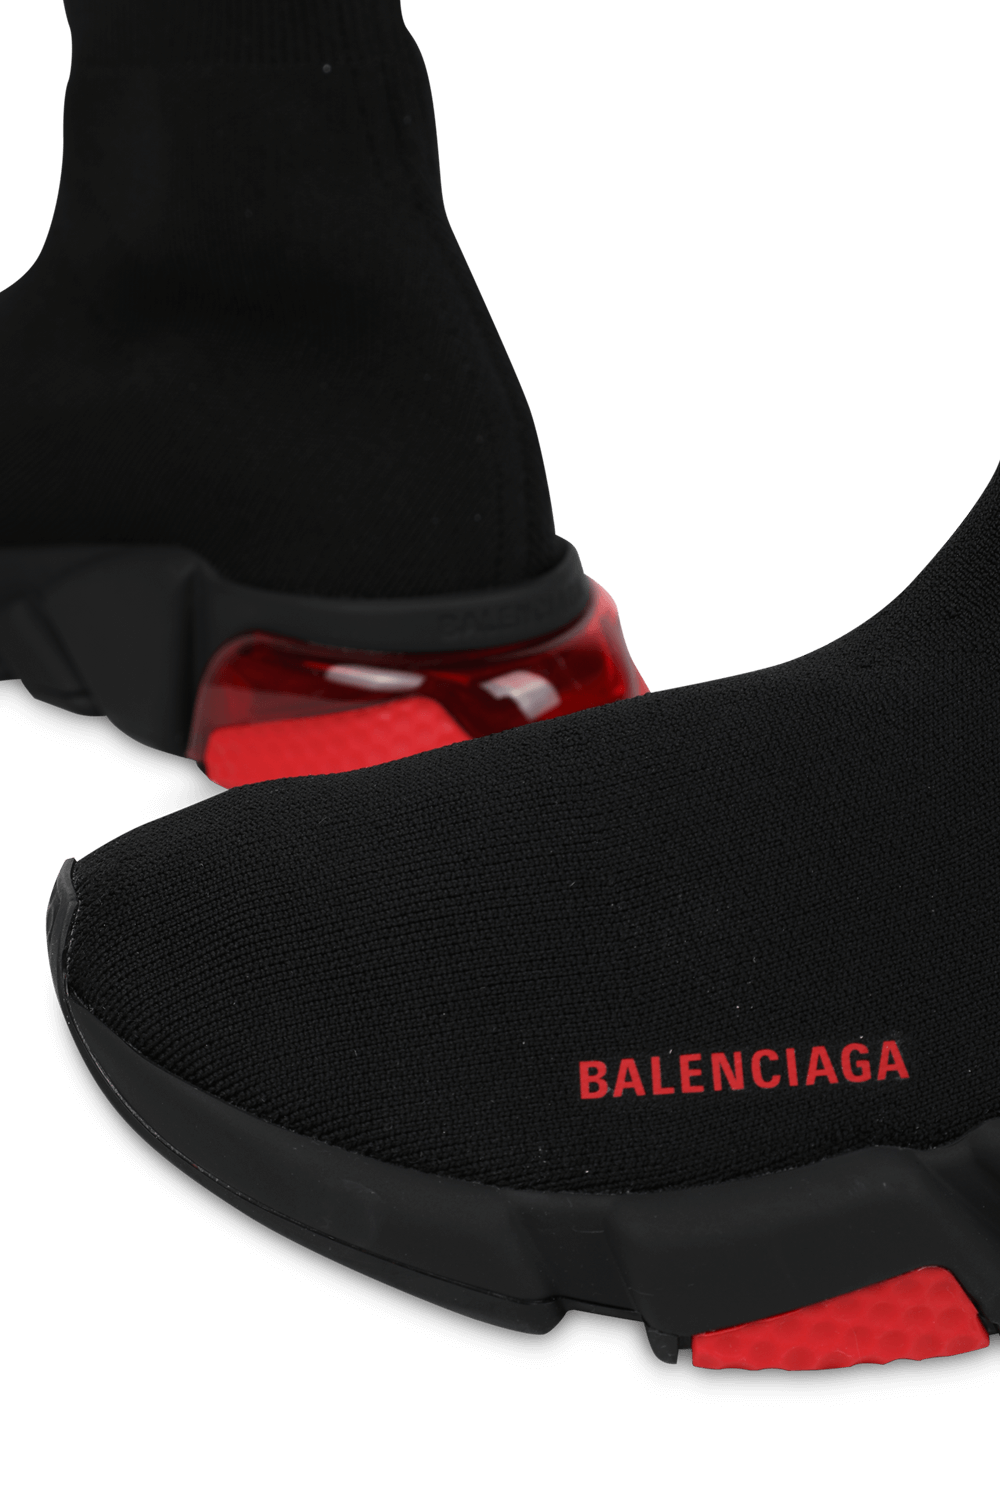 Speed Clear Sole Sneaker in Black and Red BALENCIAGA